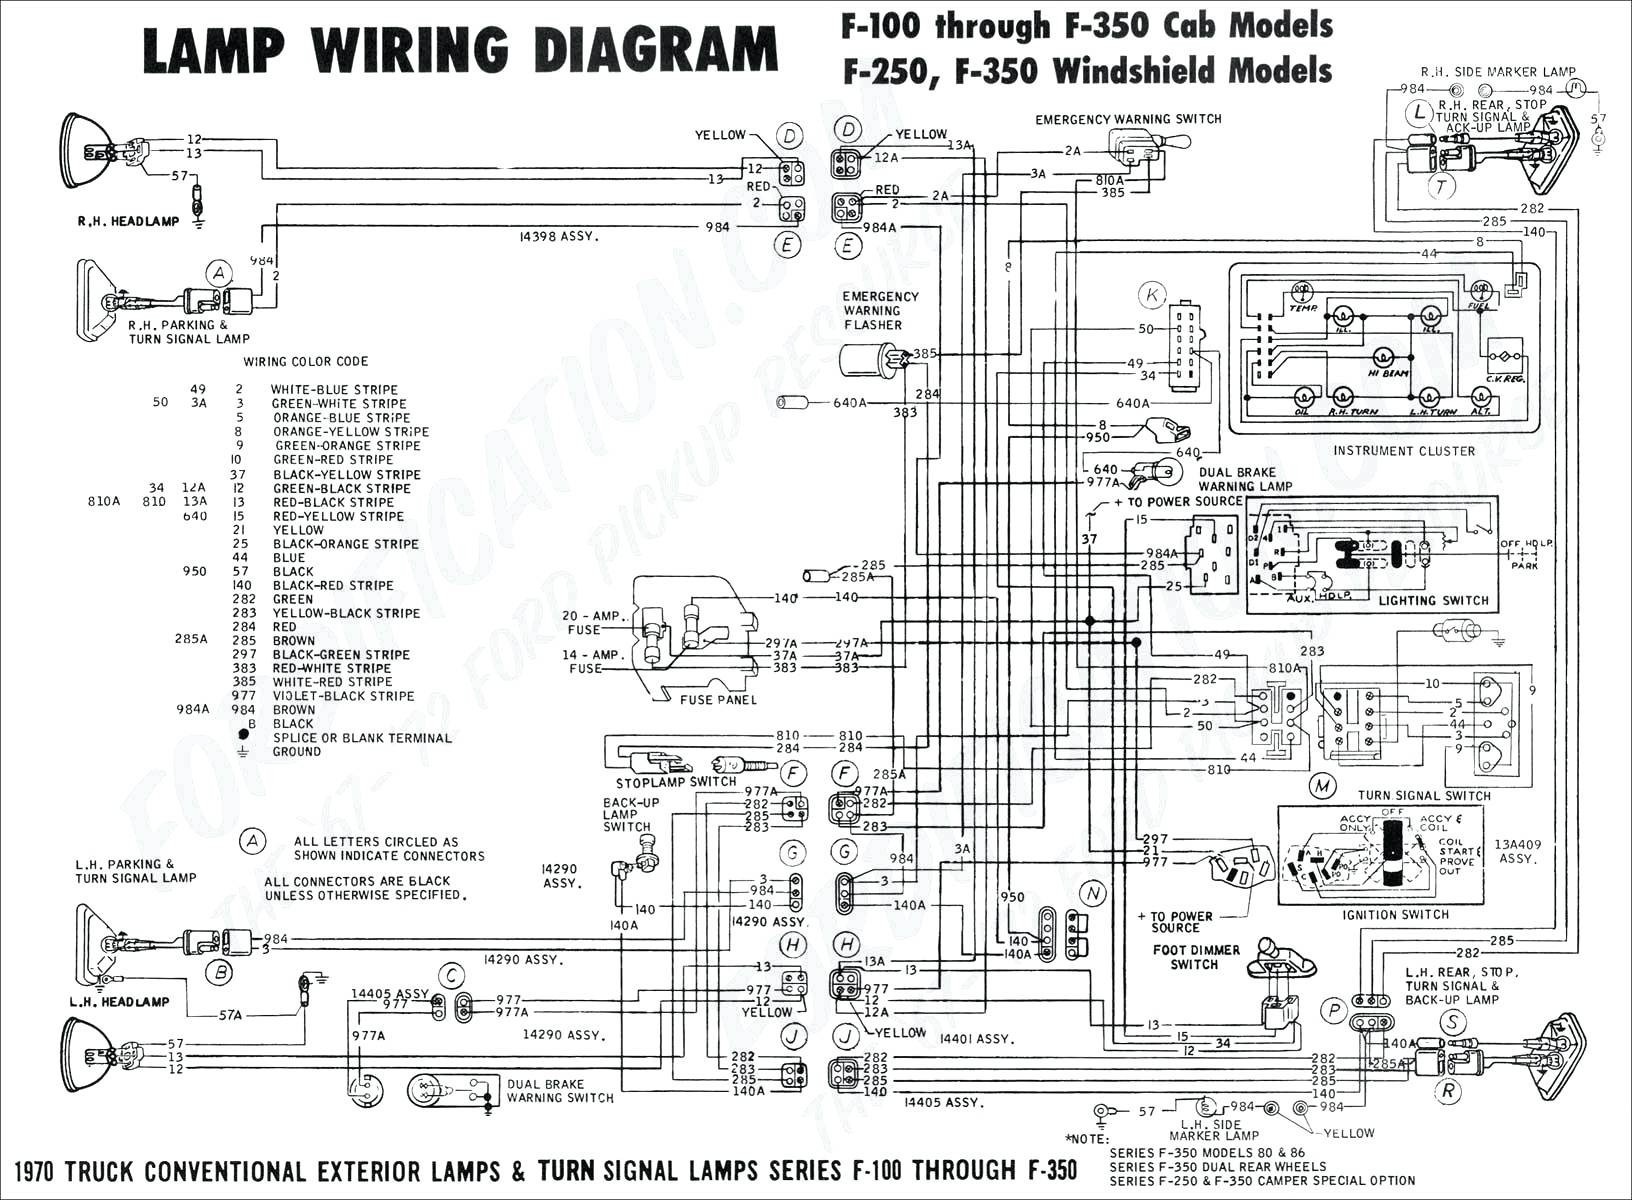 2003 Ford Expedition Fuel Pump Wiring Diagram Inspirational 97 F150 Trailer Wiring Diagram Collection